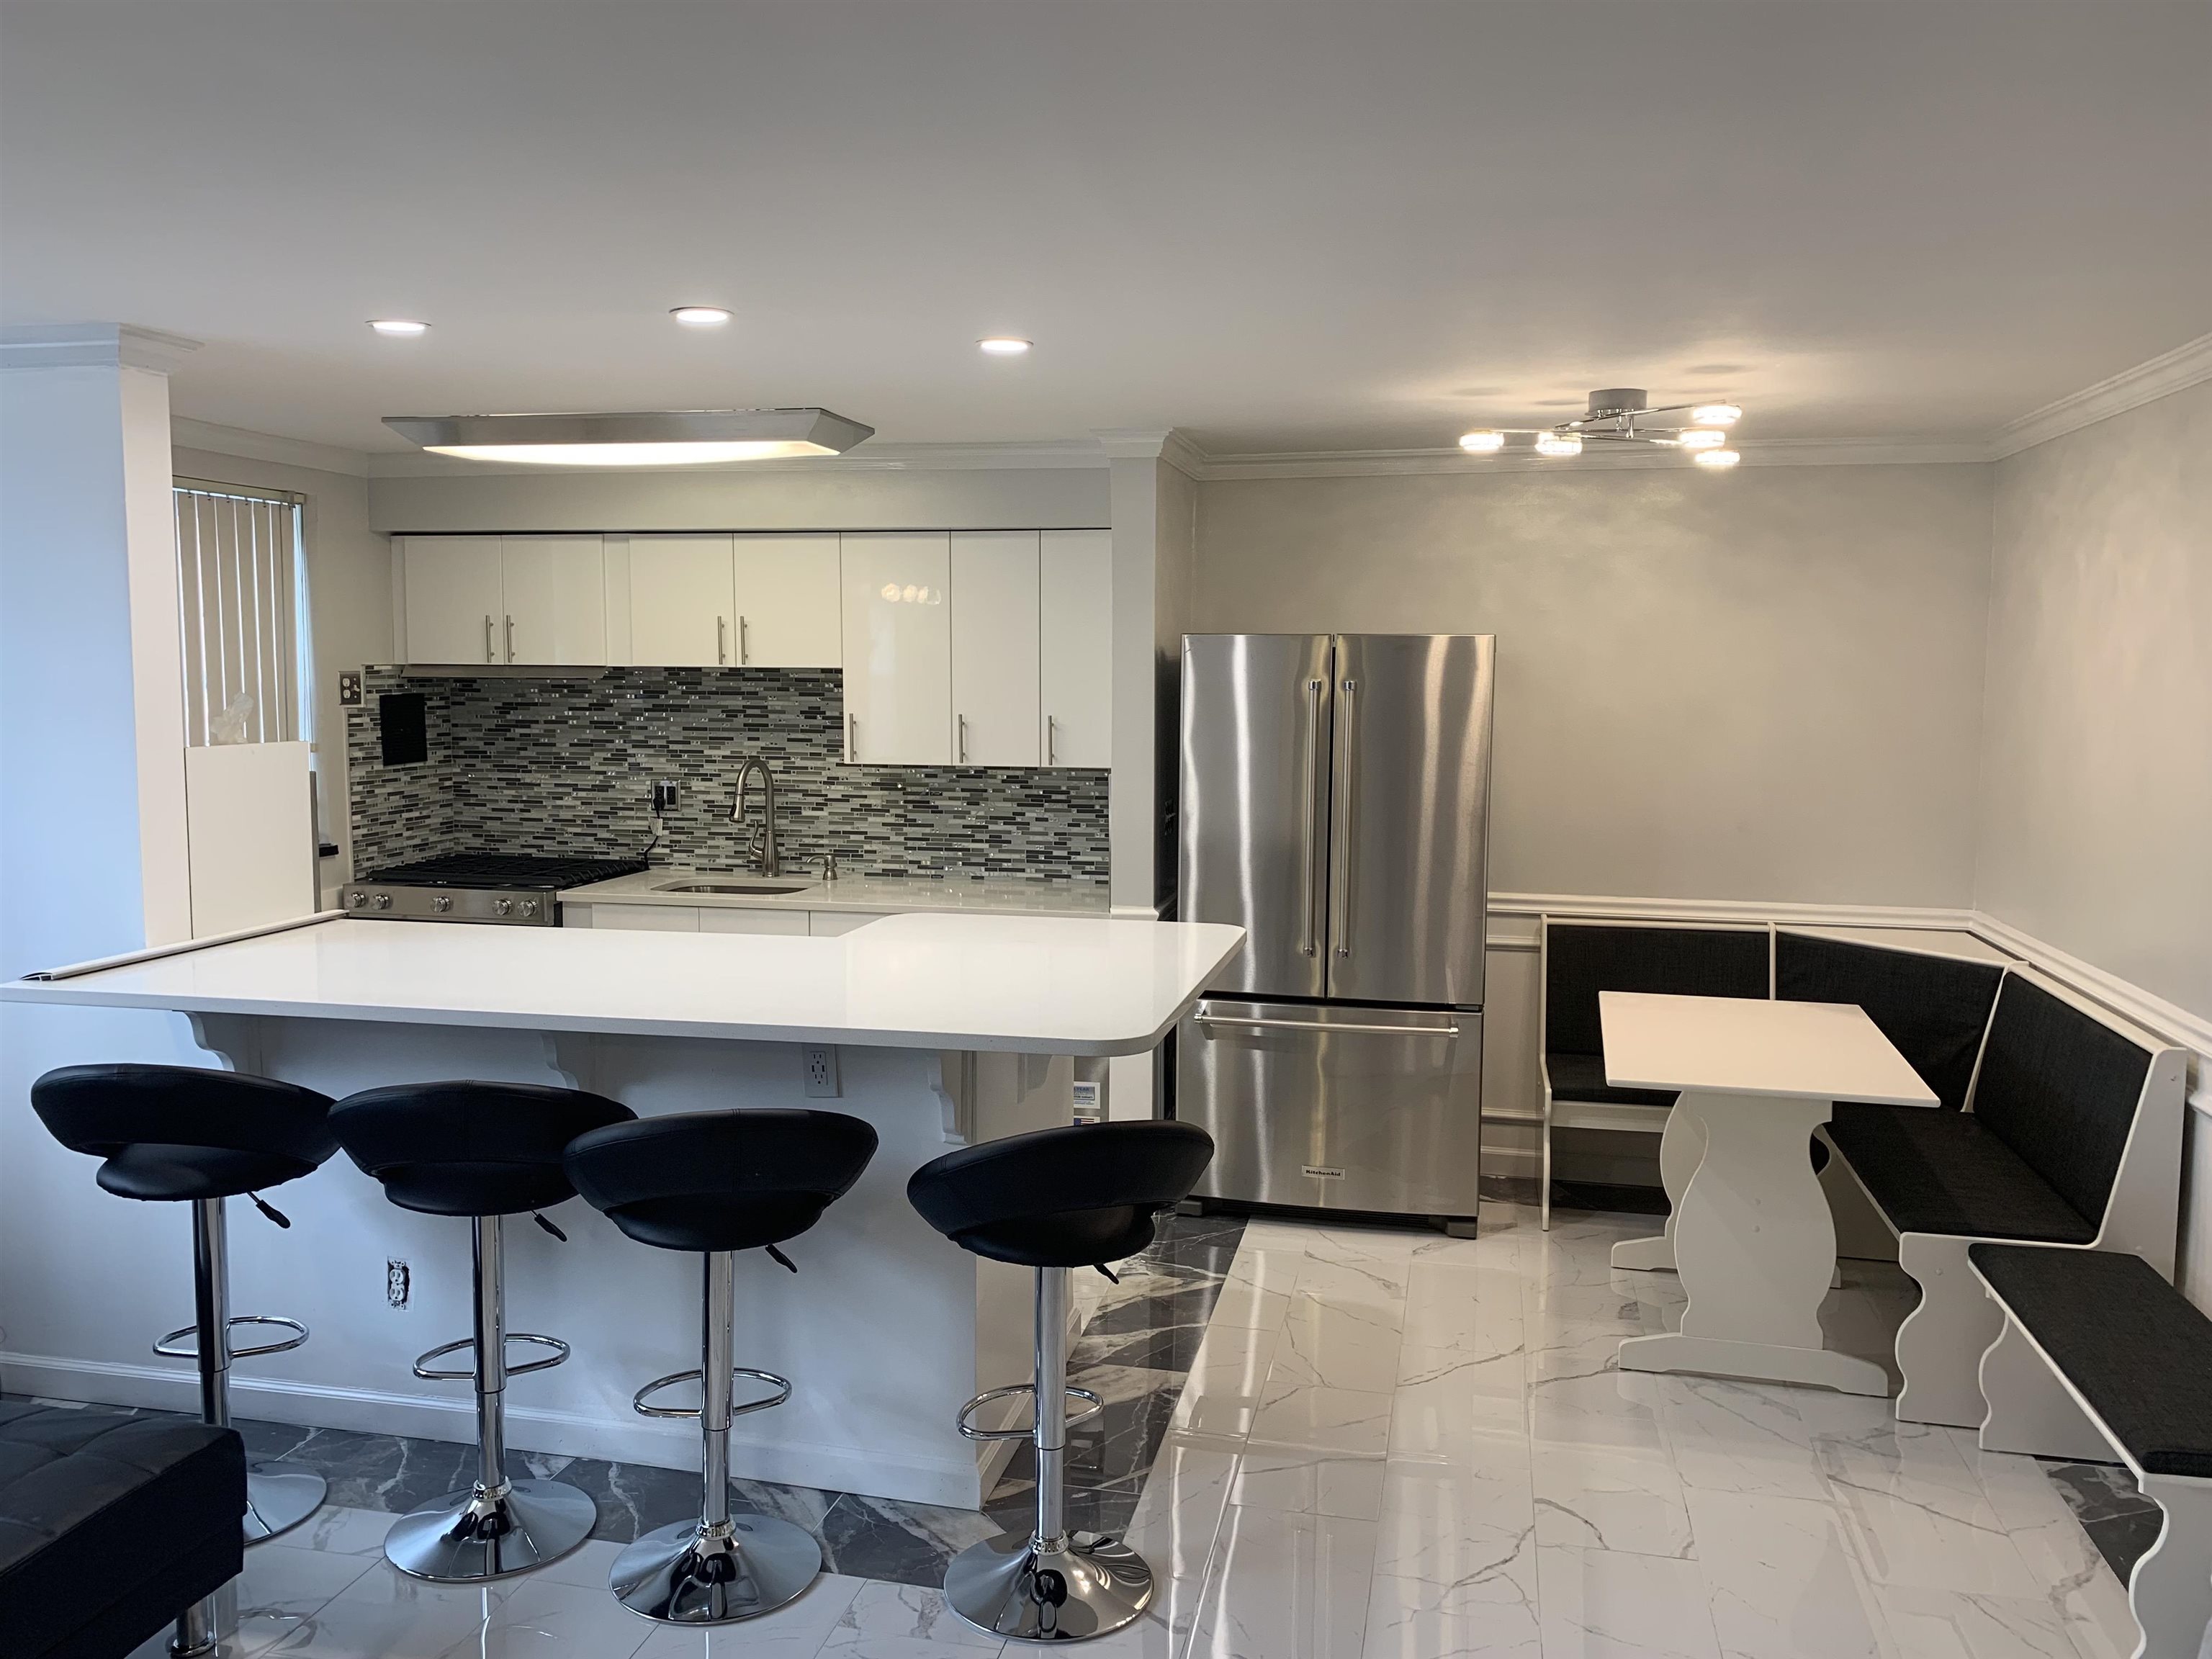 a kitchen with stainless steel appliances kitchen island granite countertop a refrigerator and chairs